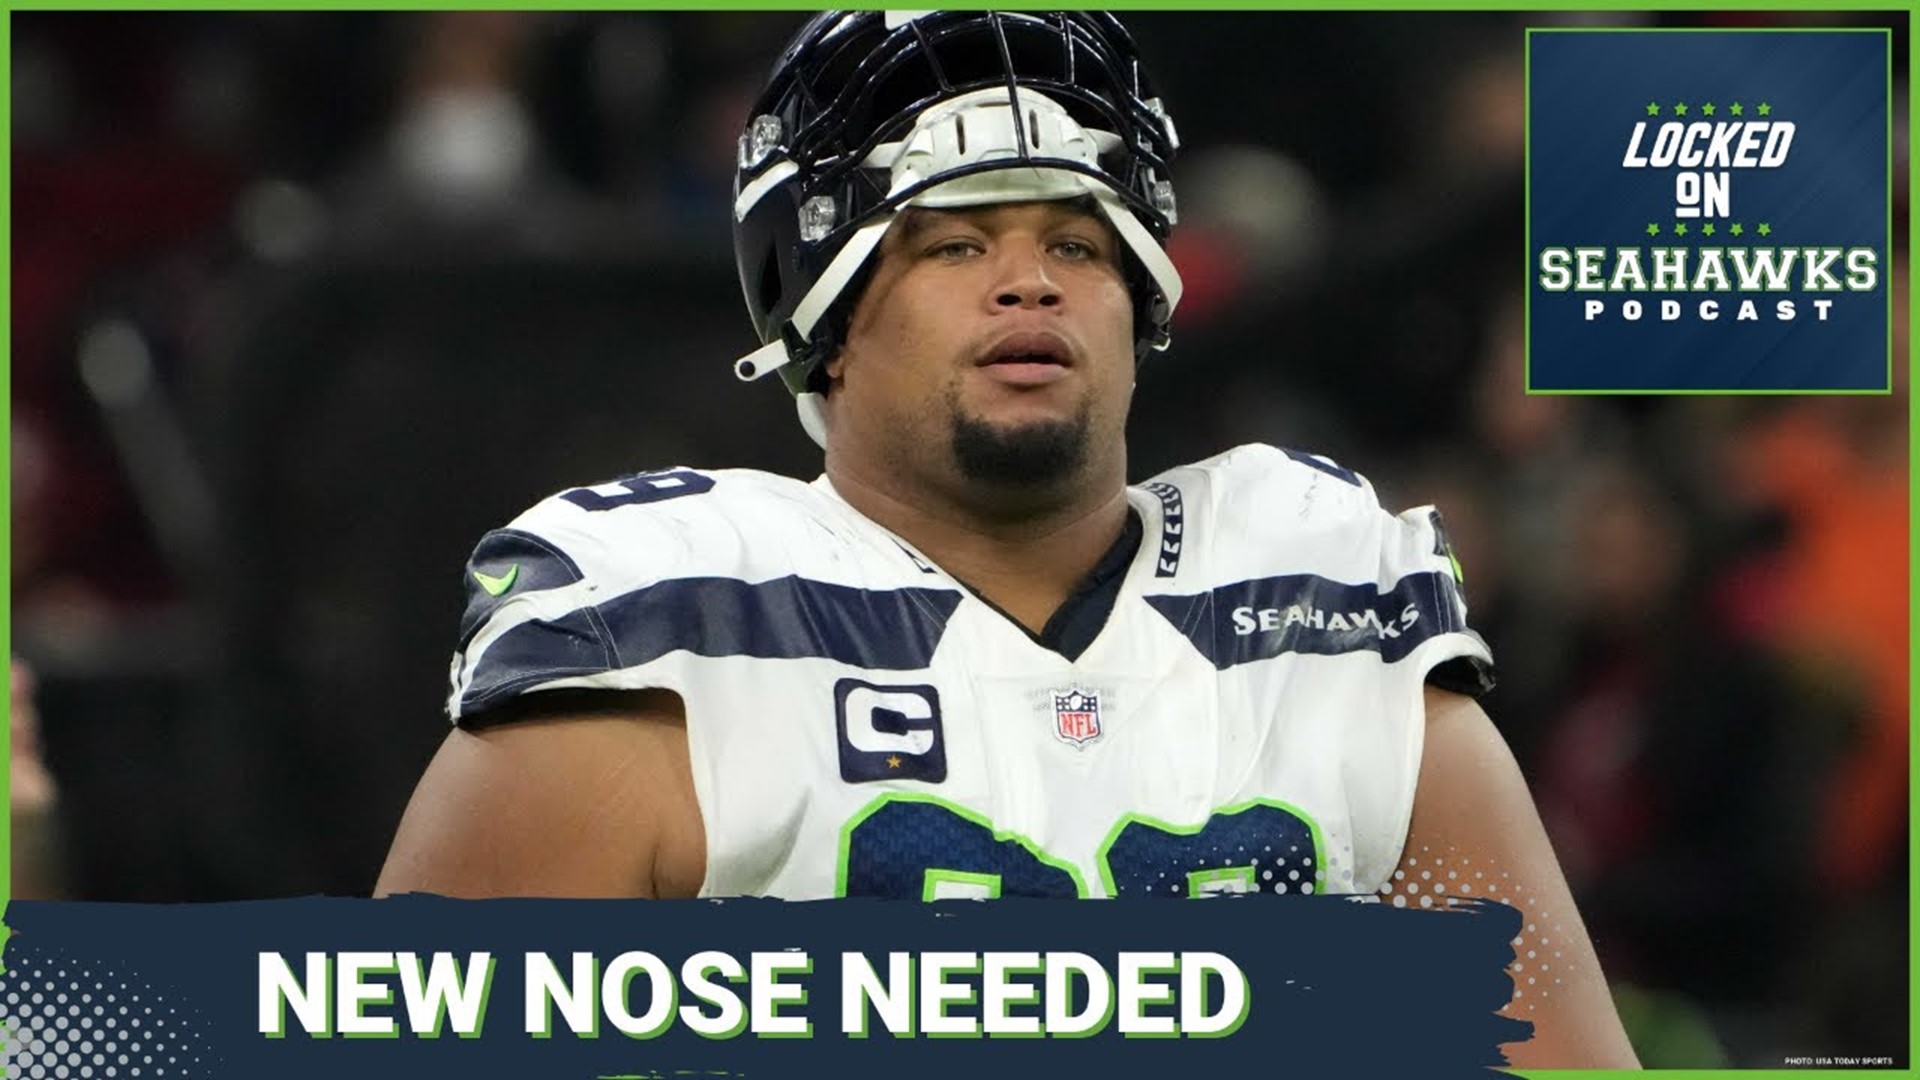 Continuing to purge their defensive line, the Seahawks parted ways with veteran Al Woods, leaving a massive void in the middle of the trenches.